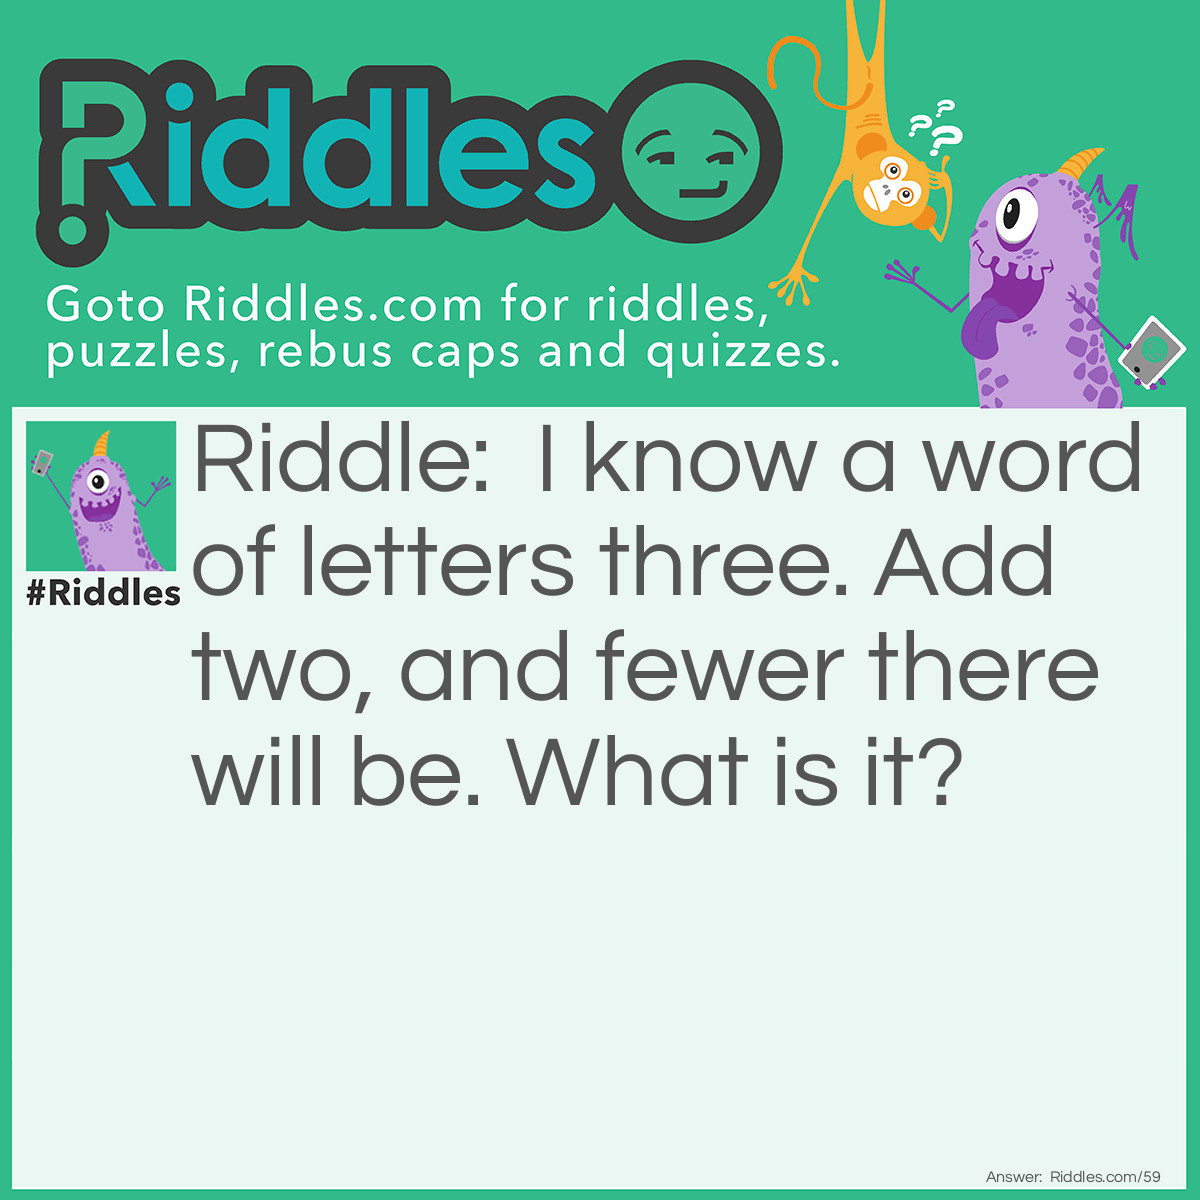 Riddle: I know a word of letters three. Add two, and fewer there will be. What is it? Answer: The word "Few".